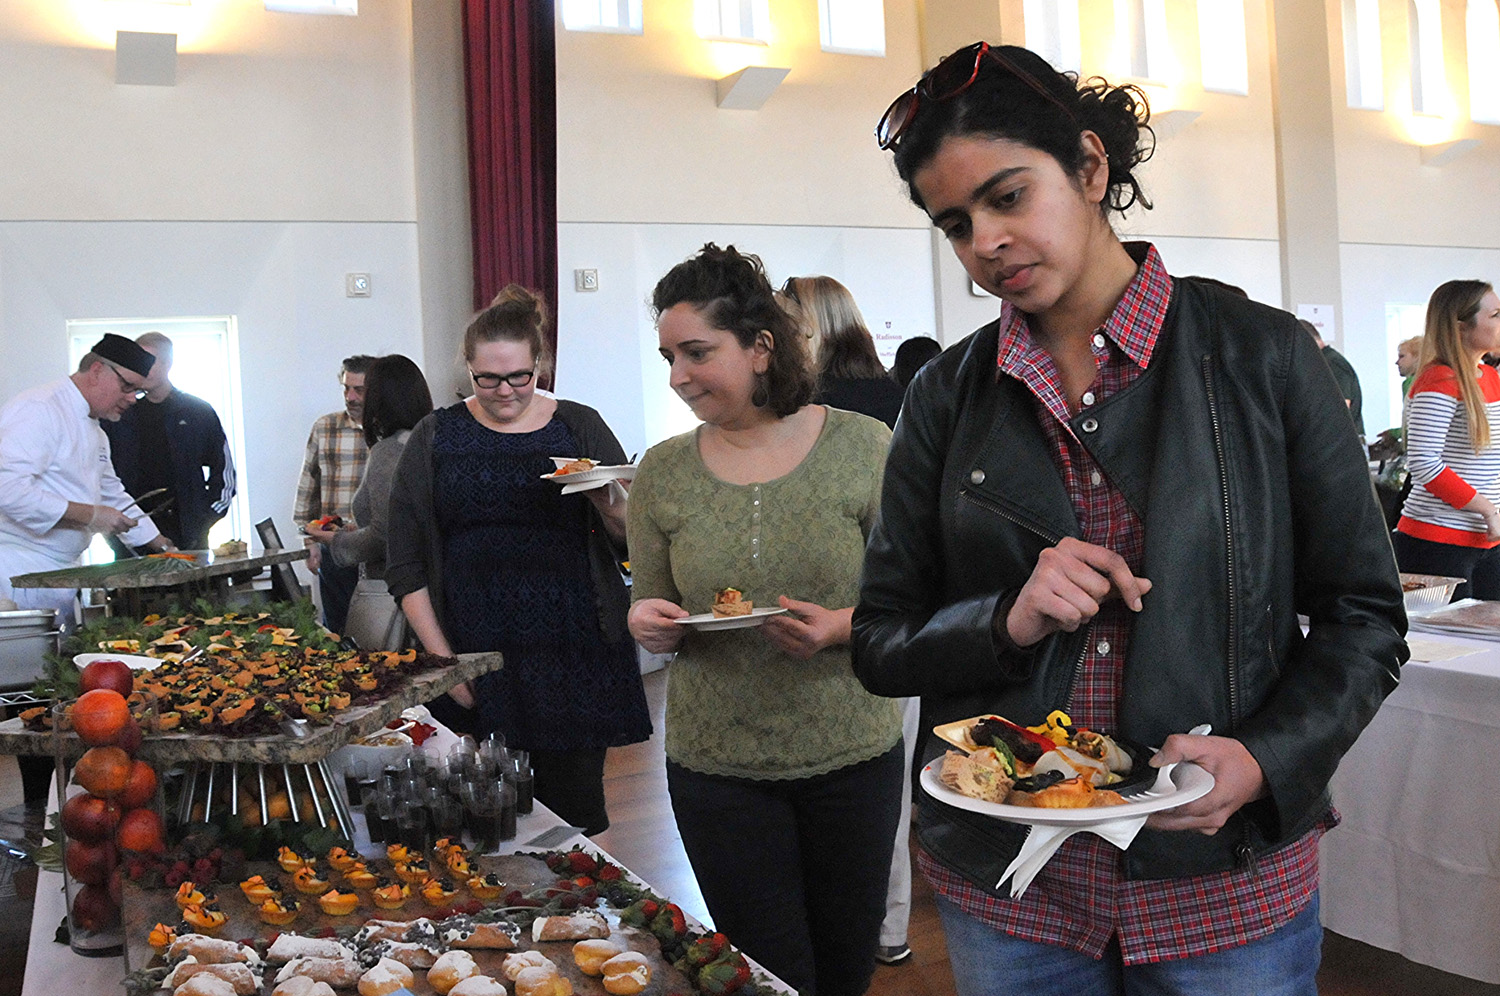 Natasha Kini, assistant director of online communications for University Relations, and others peruse the dessert spread.